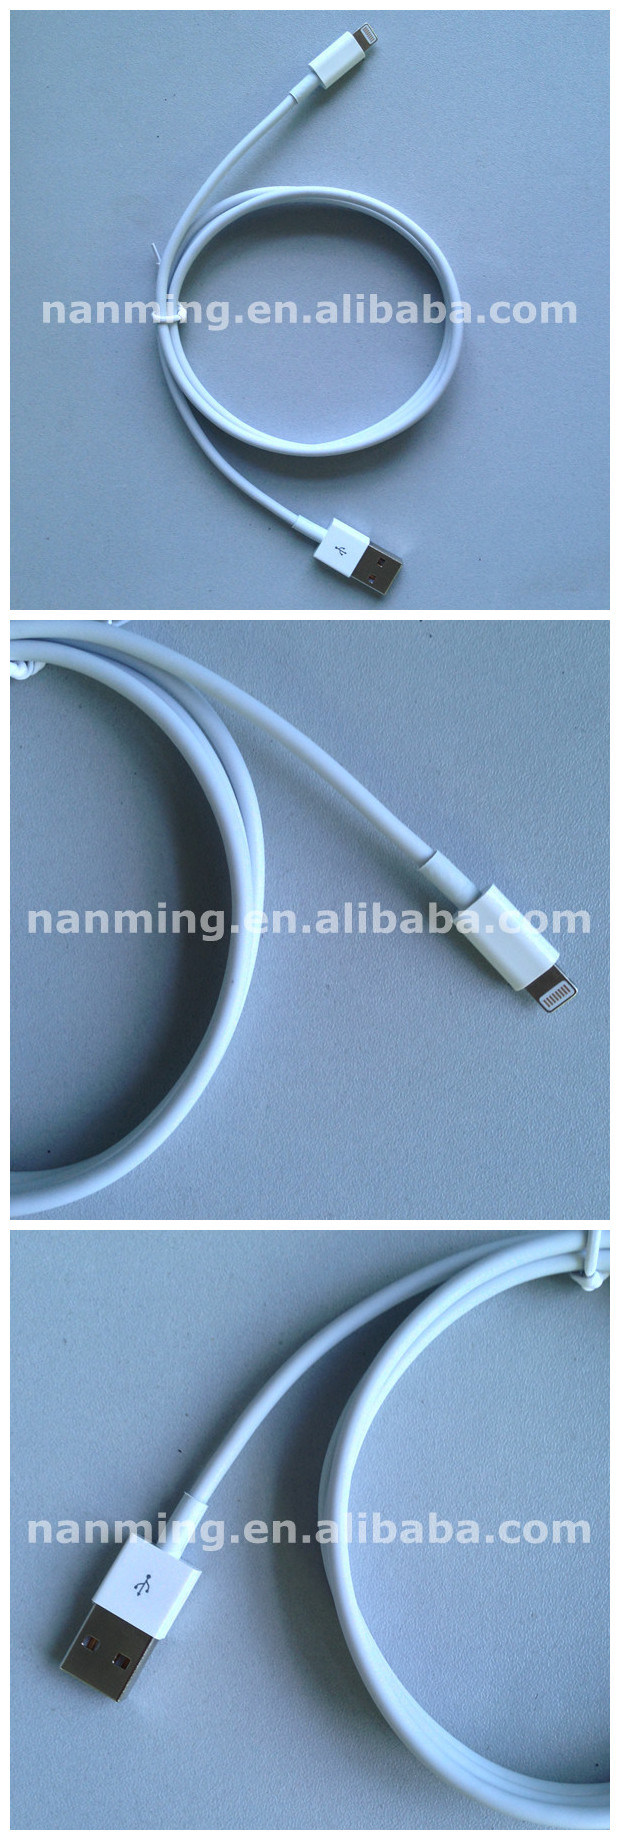 USB Cable for Apple iPhone 5 / iPhone 6